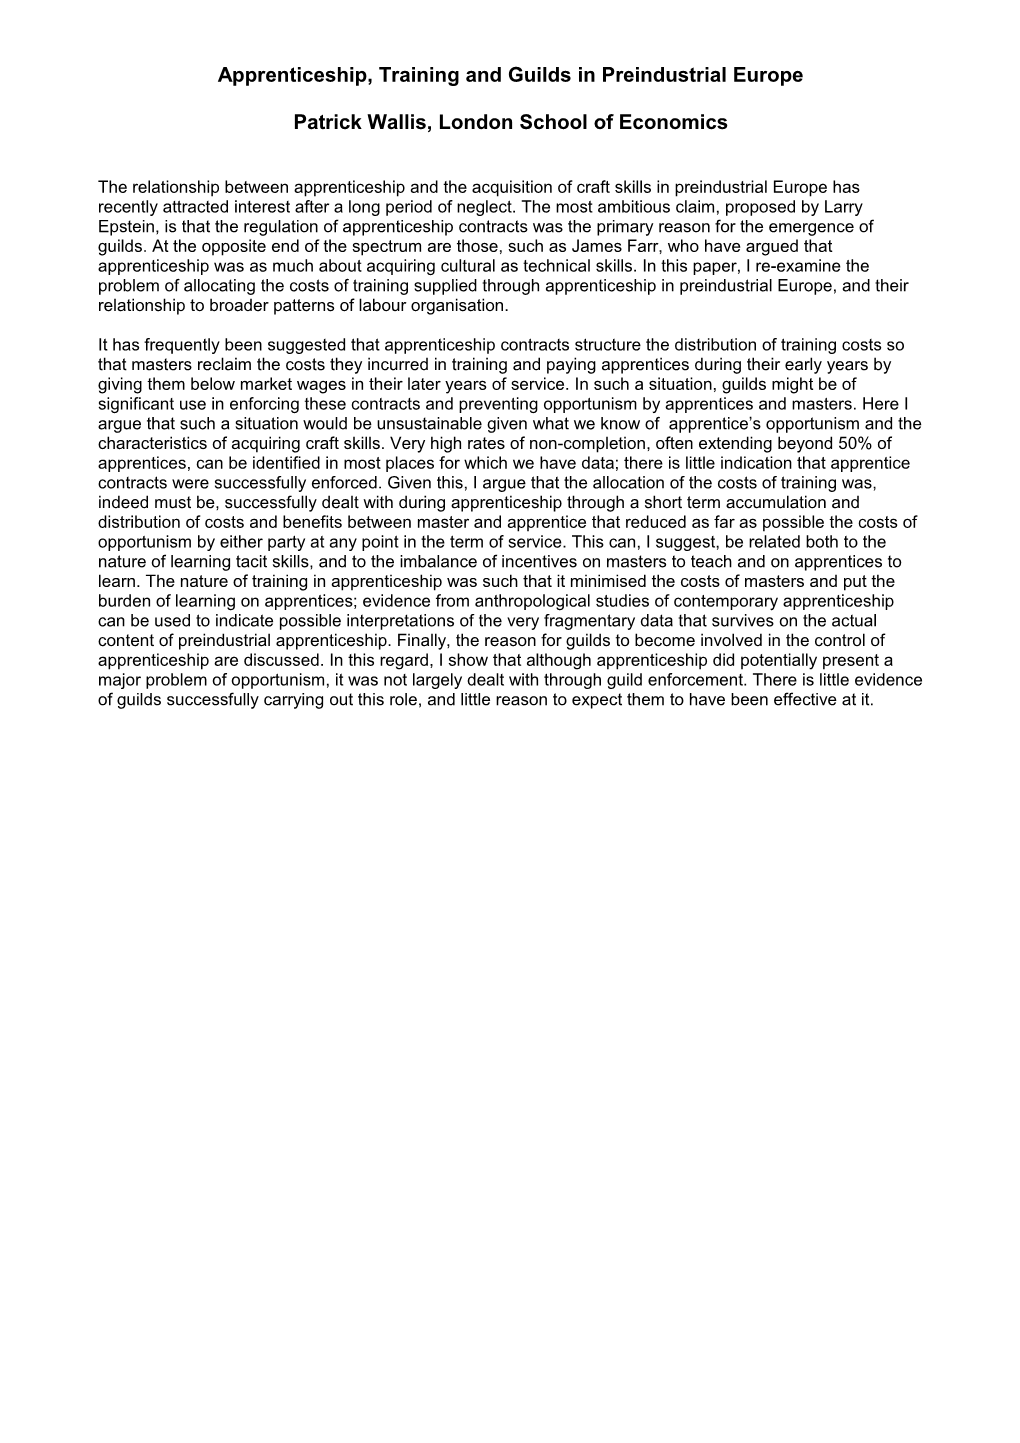 Abstract for Economic History Society, Annual Meeting, 2005